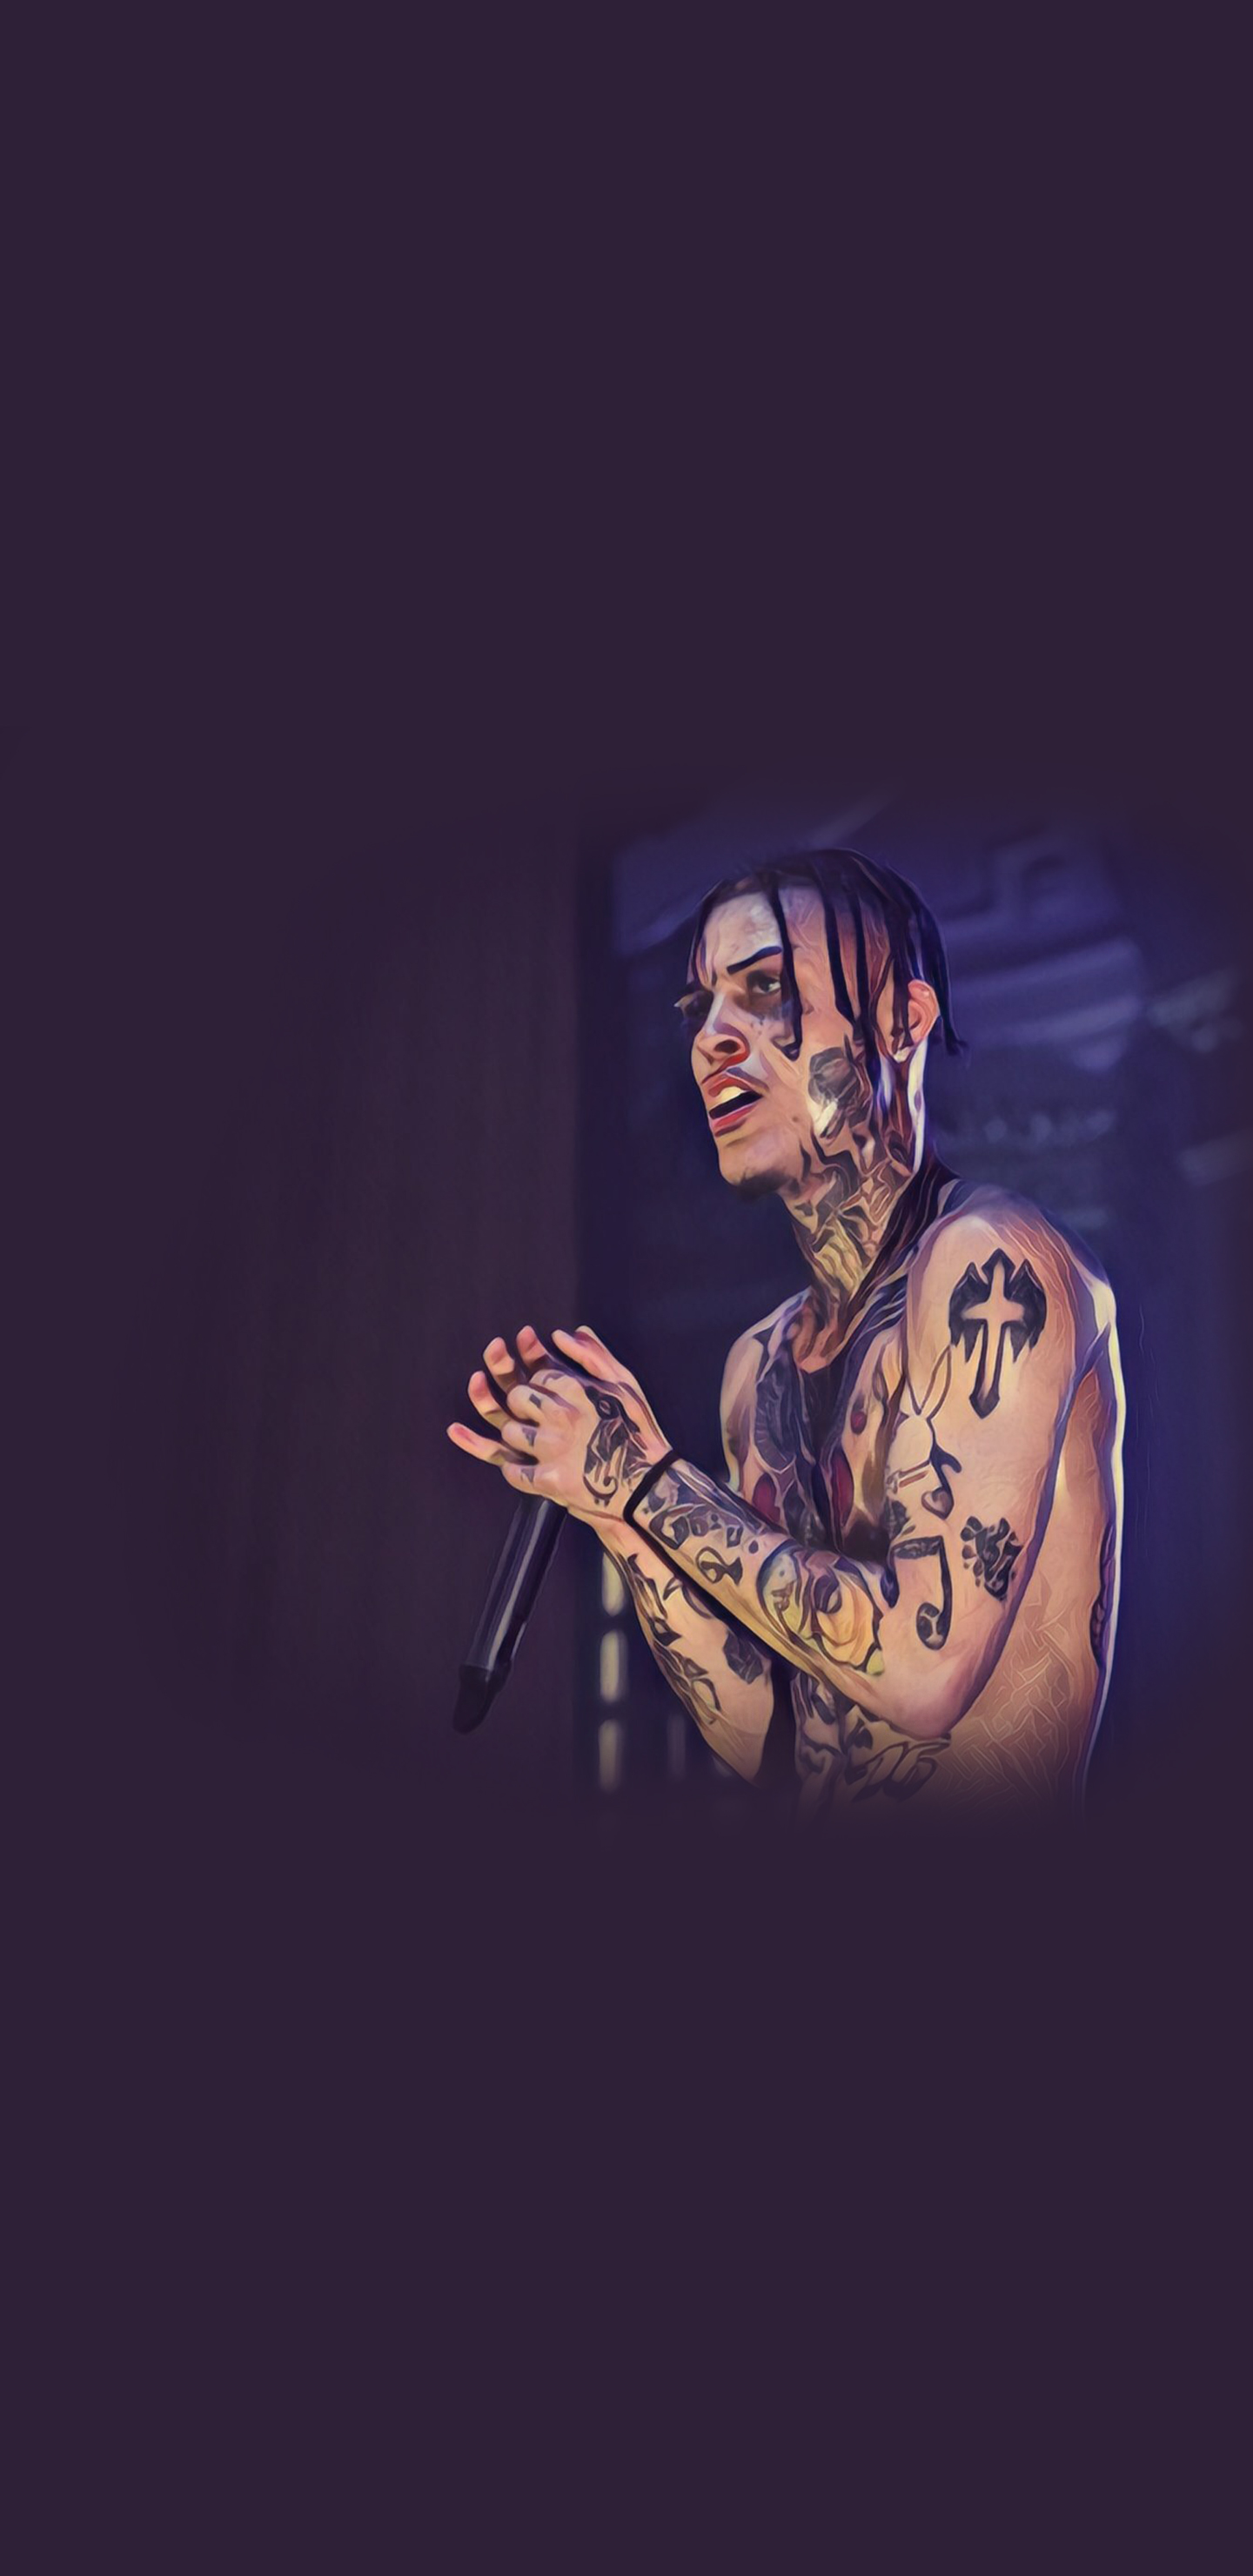 Px - Lil Skies 1920 X 1080 , HD Wallpaper & Backgrounds